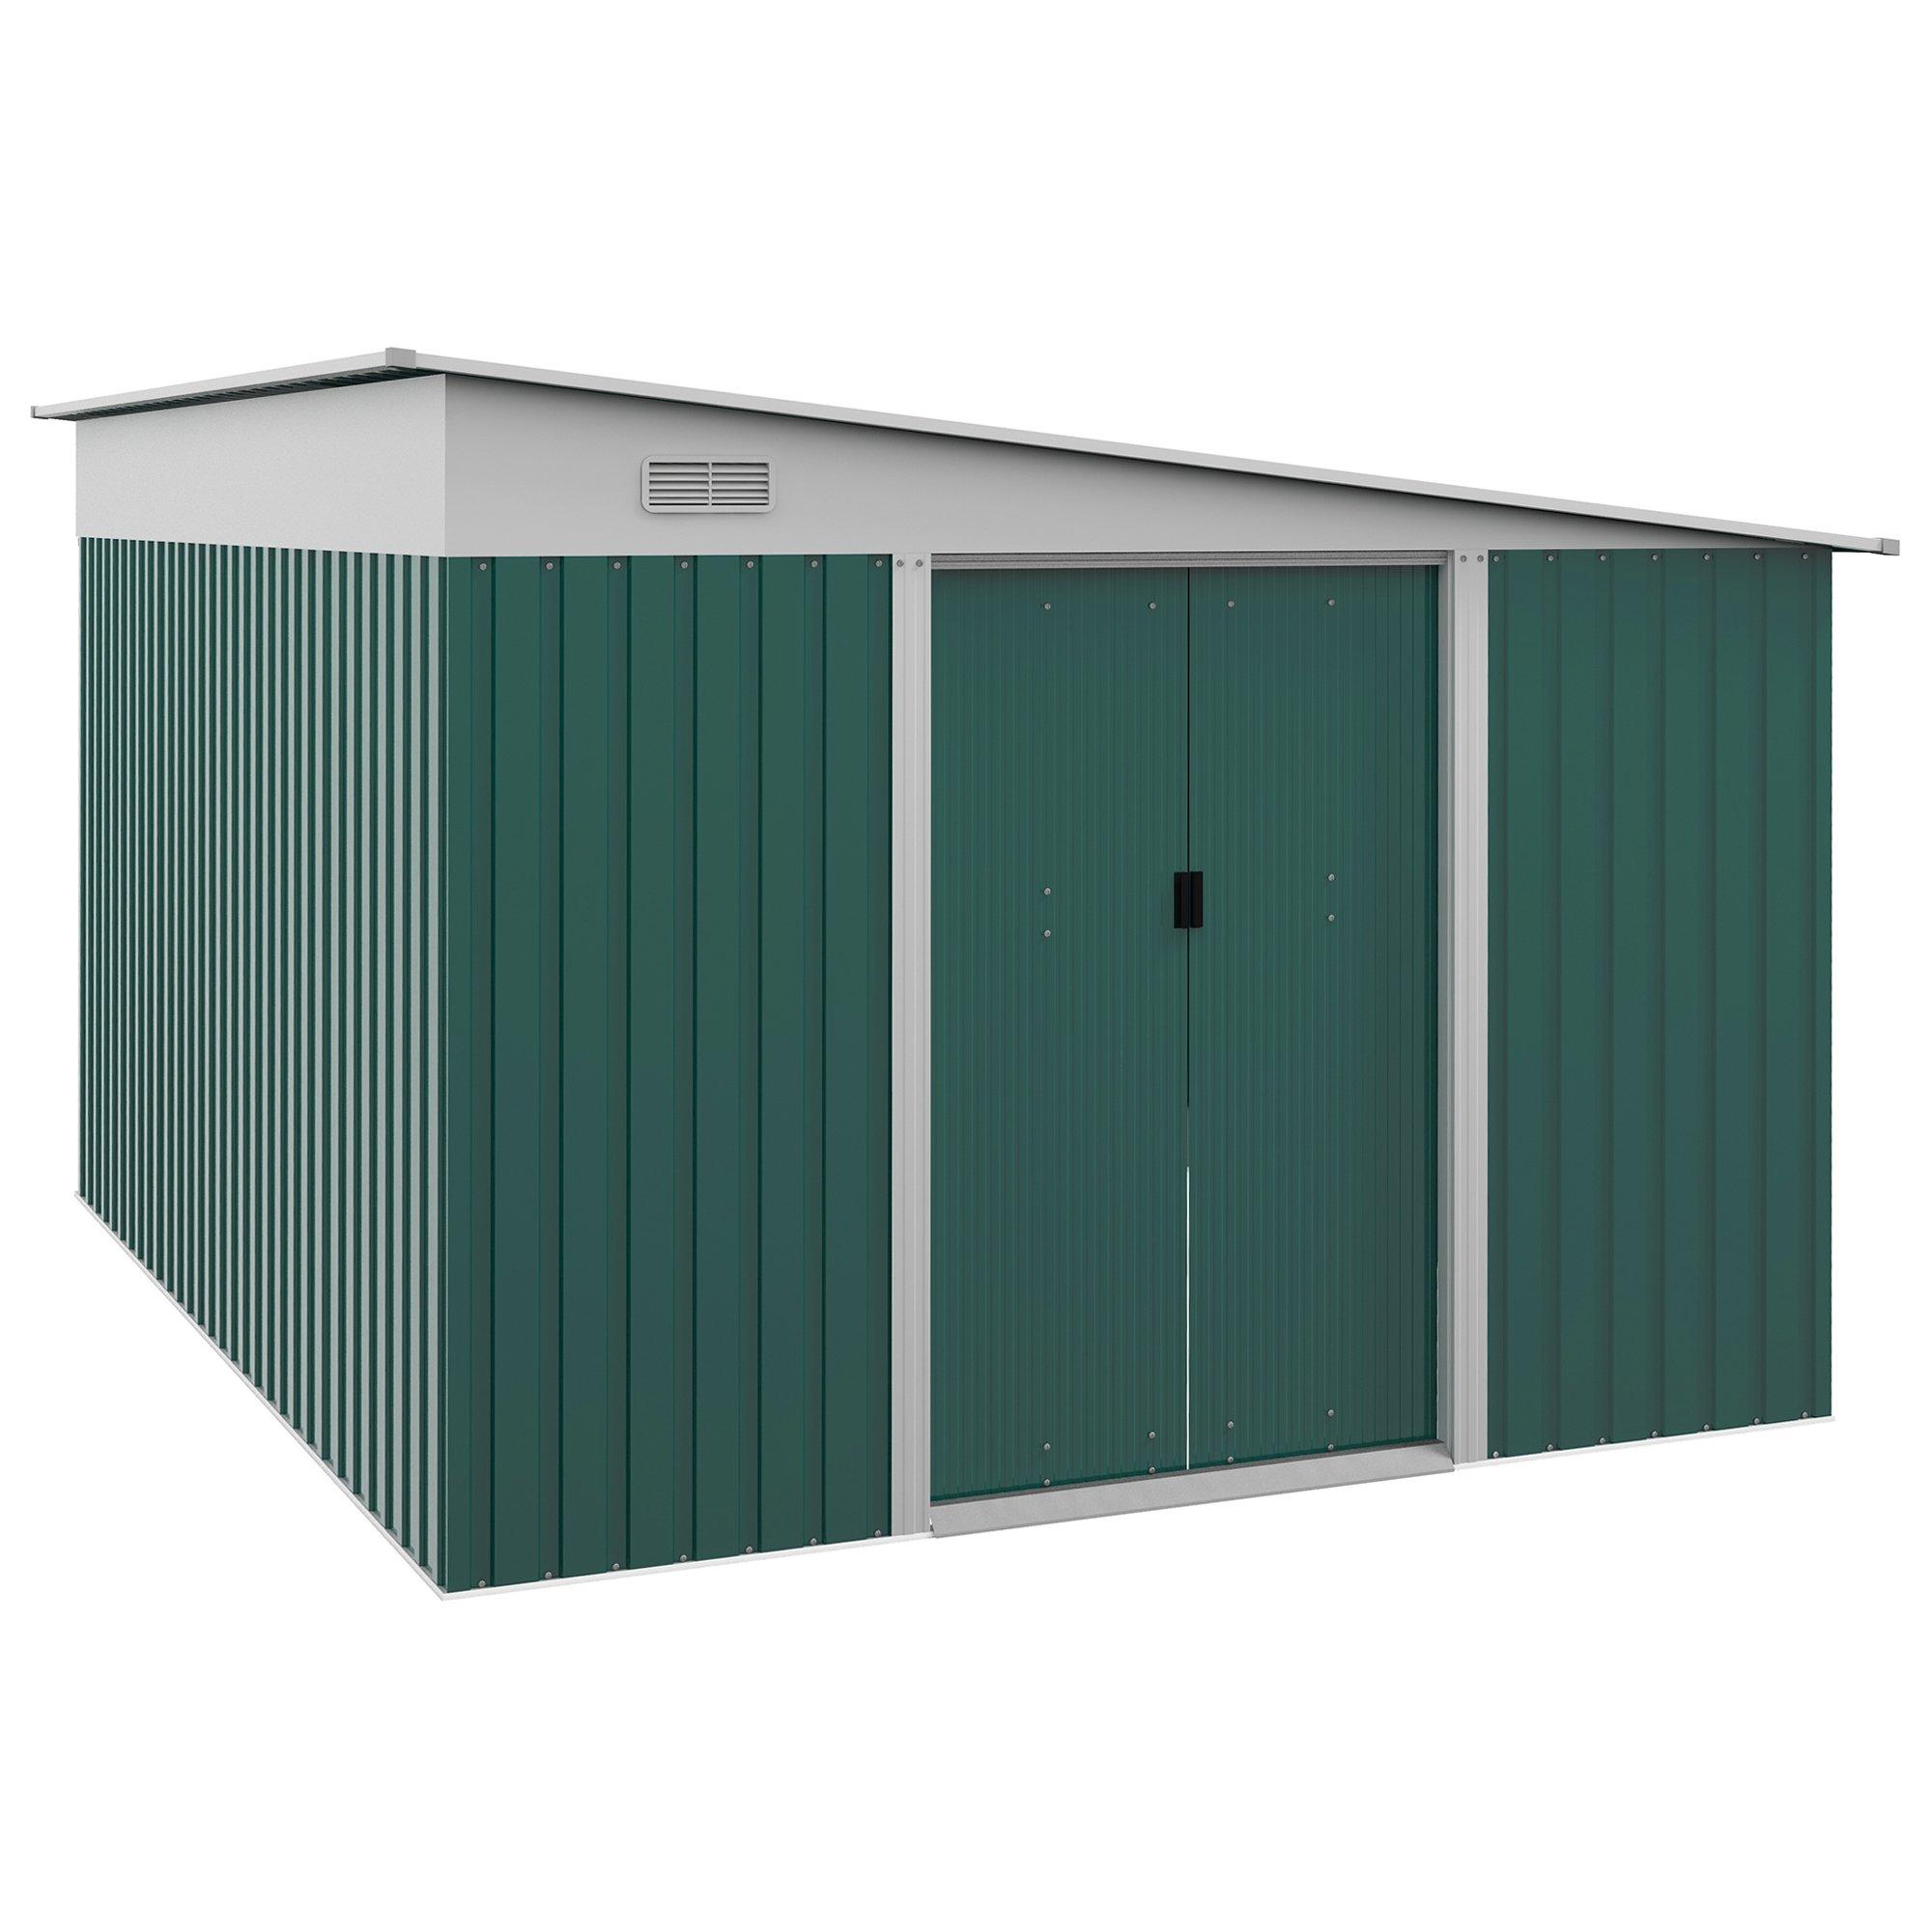 11.3x9.2ft Steel Garden Storage Shed Tool House w/ Sliding Doors & 2 Air Vents